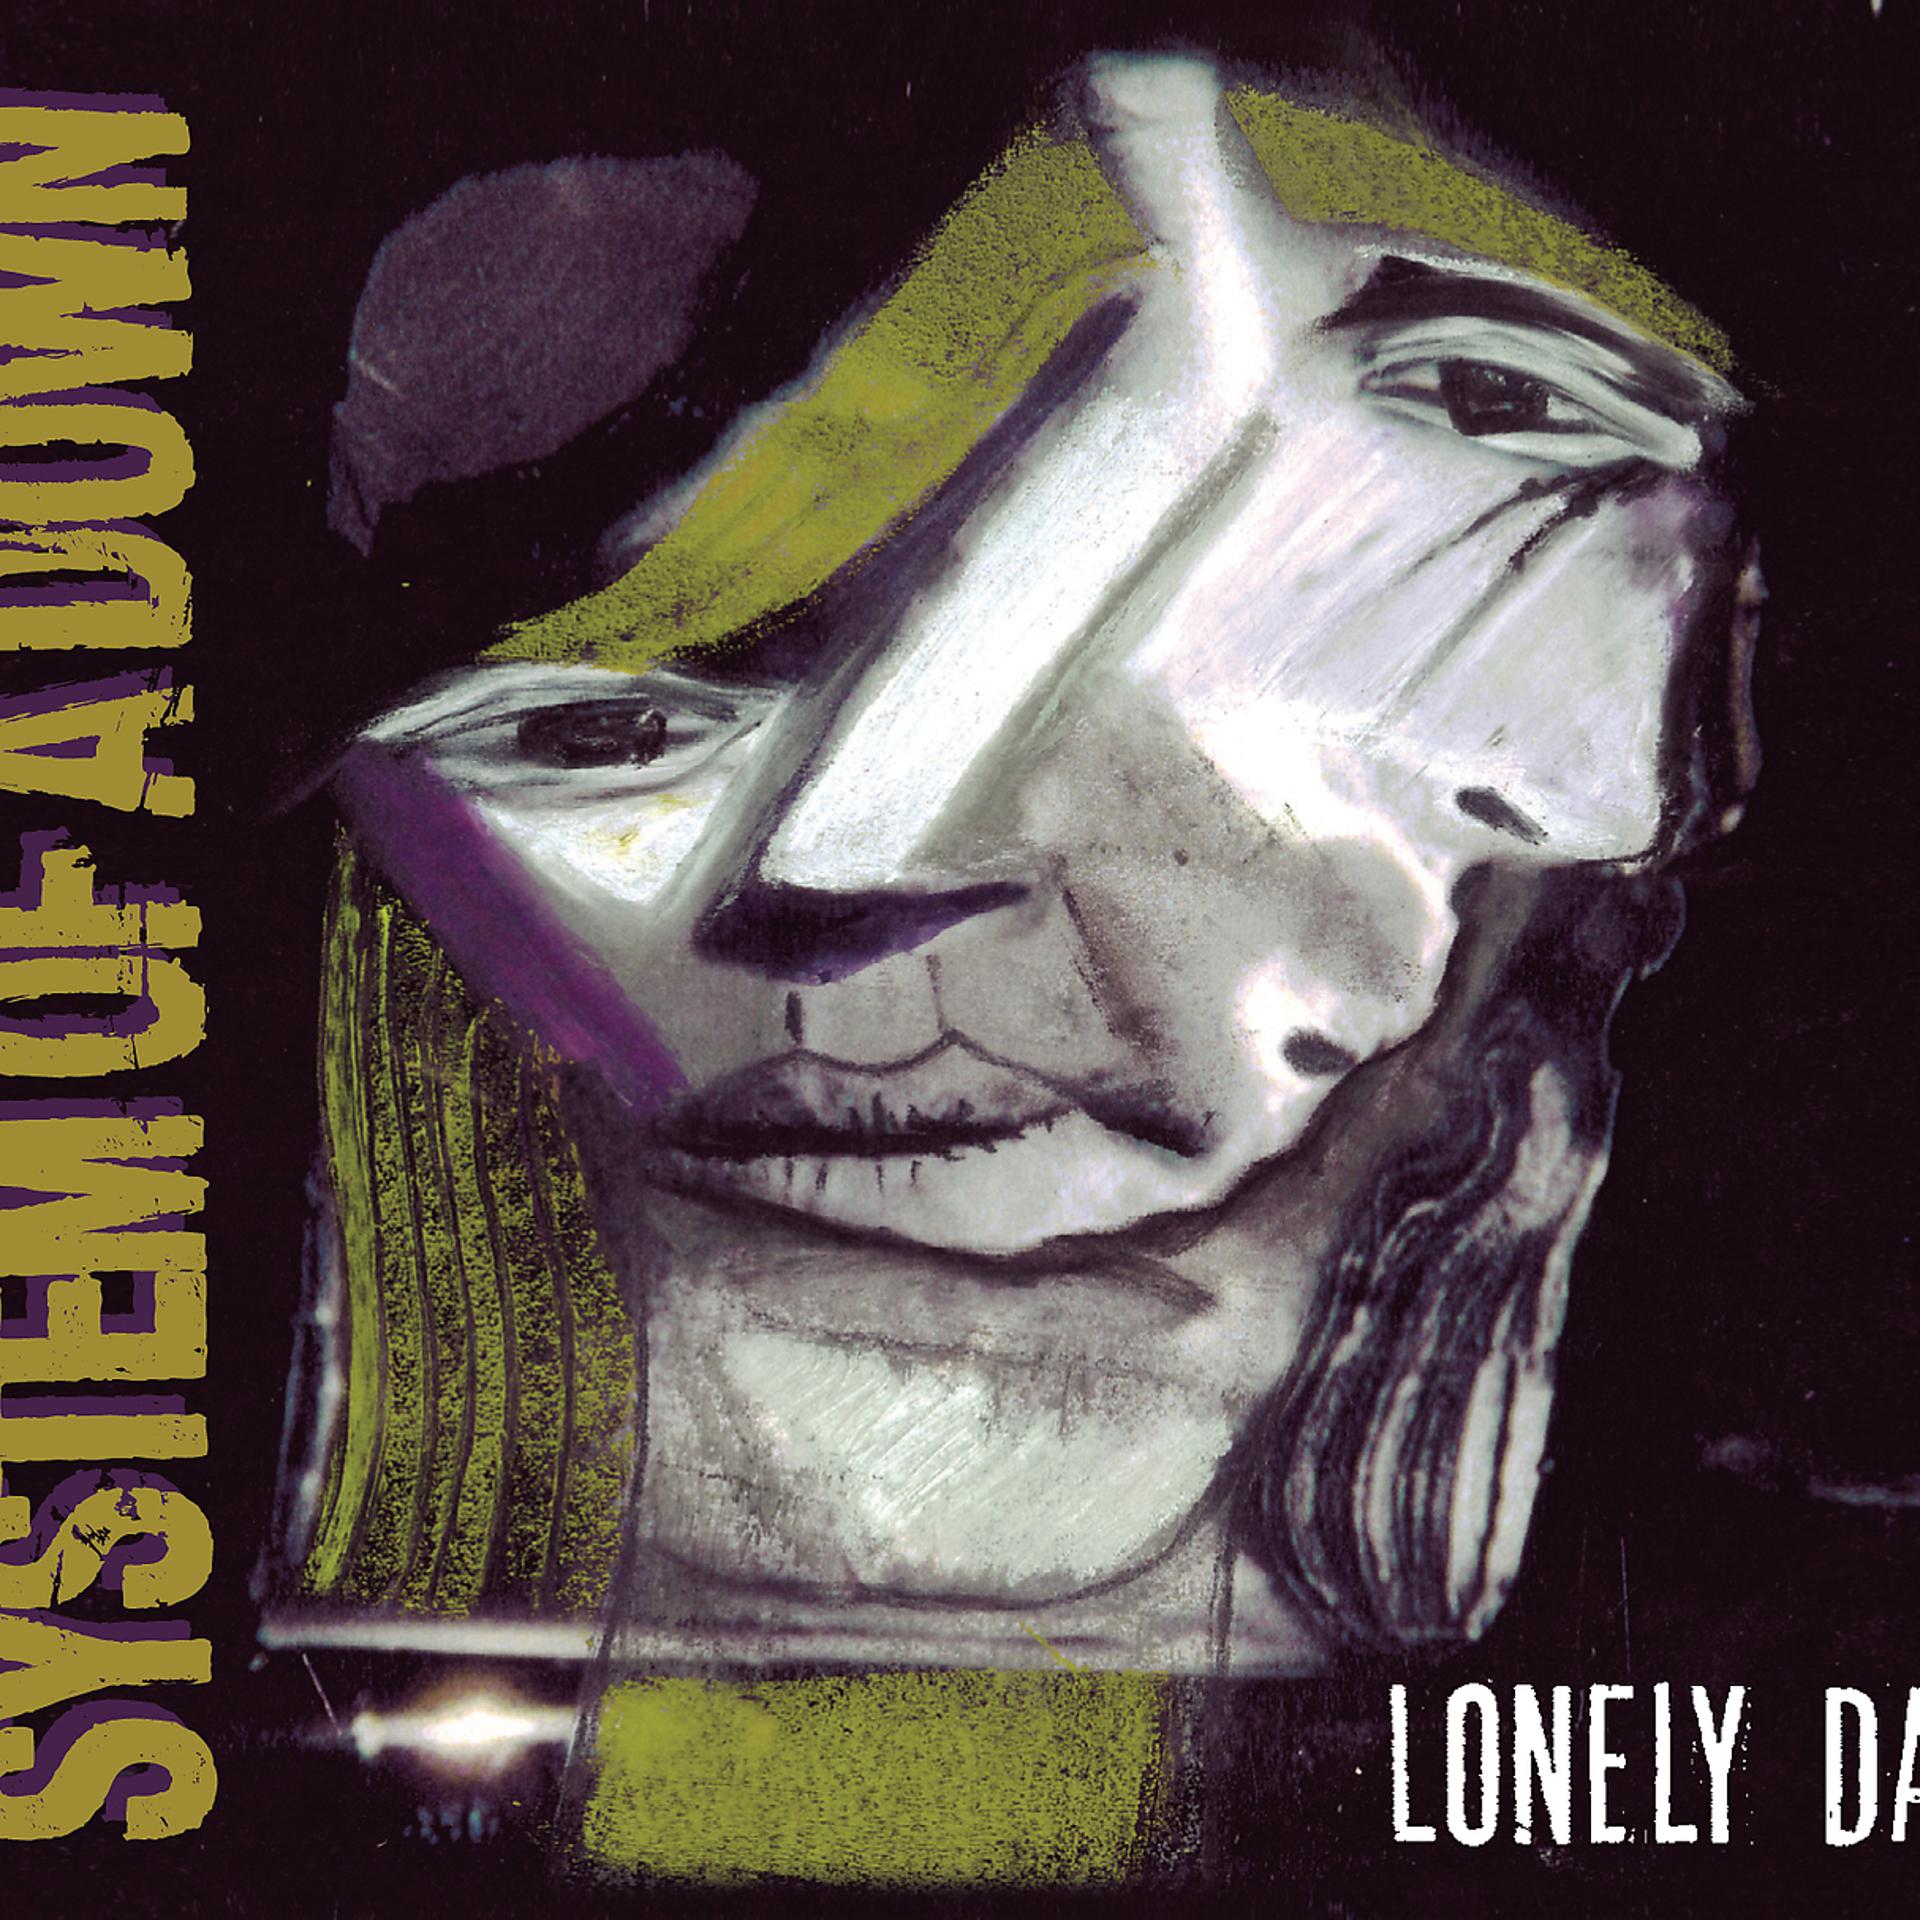 Lonely Day System of a down. System of a down Lonely Day альбом. Lonely Day обложка. SOAD Lonely Day обложка. Such lonely